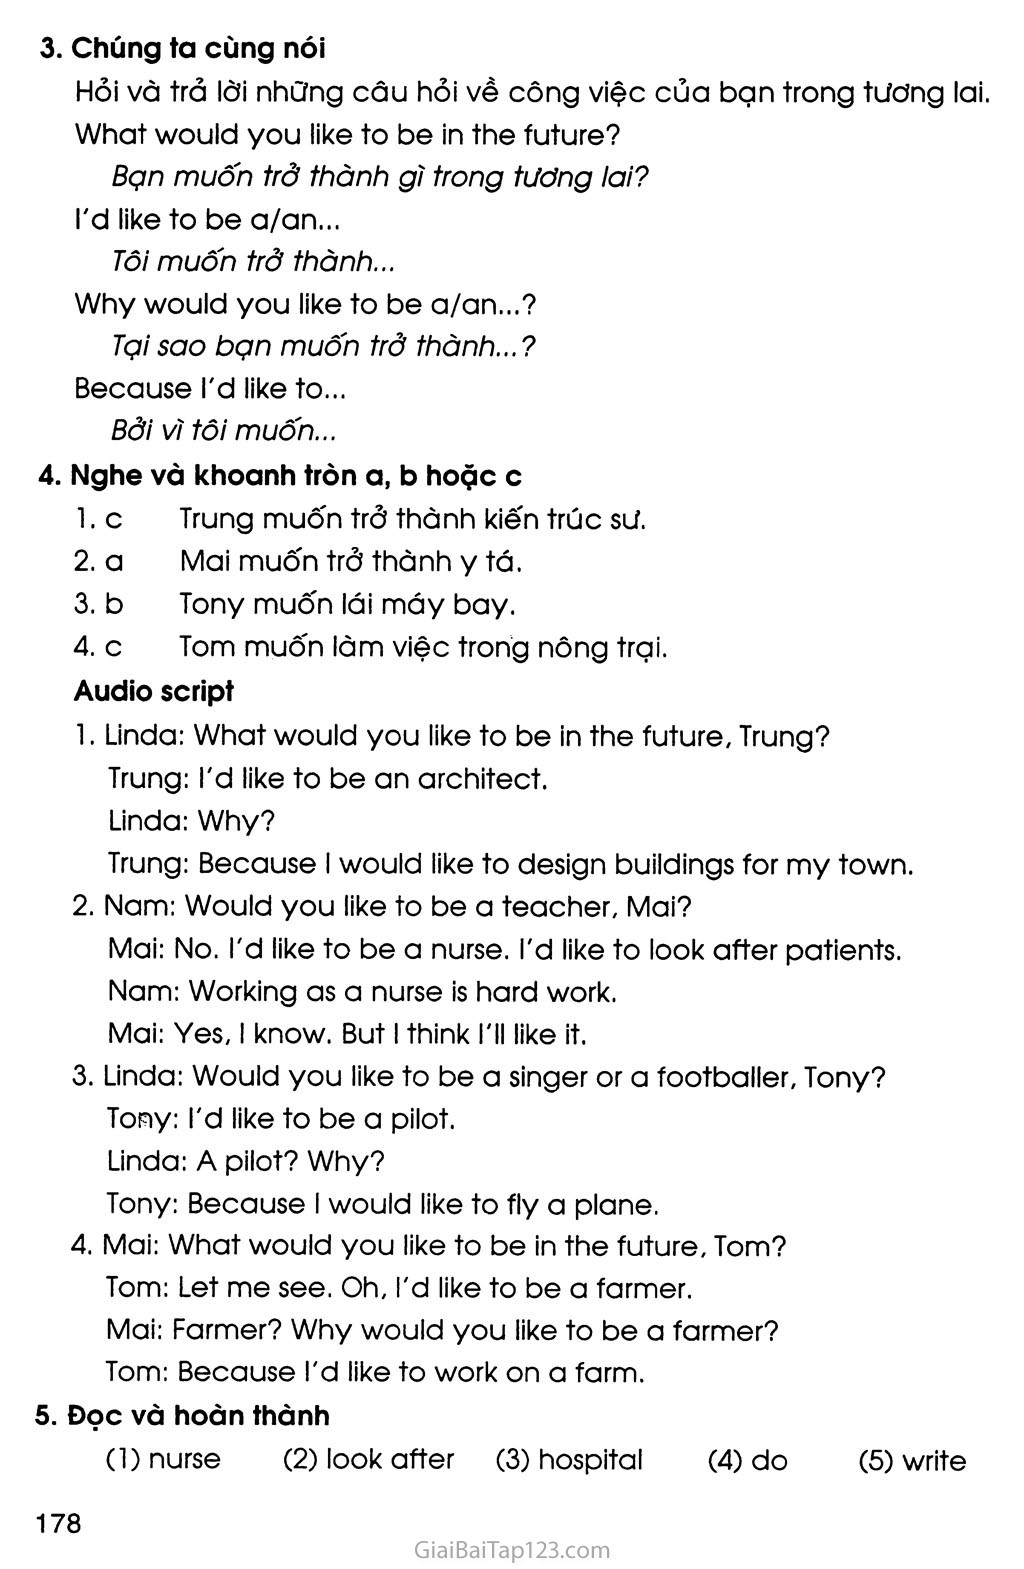 UNIT 15: WHAT WOULD YOU LIKE TO BE IN THE FUTURE? trang 8